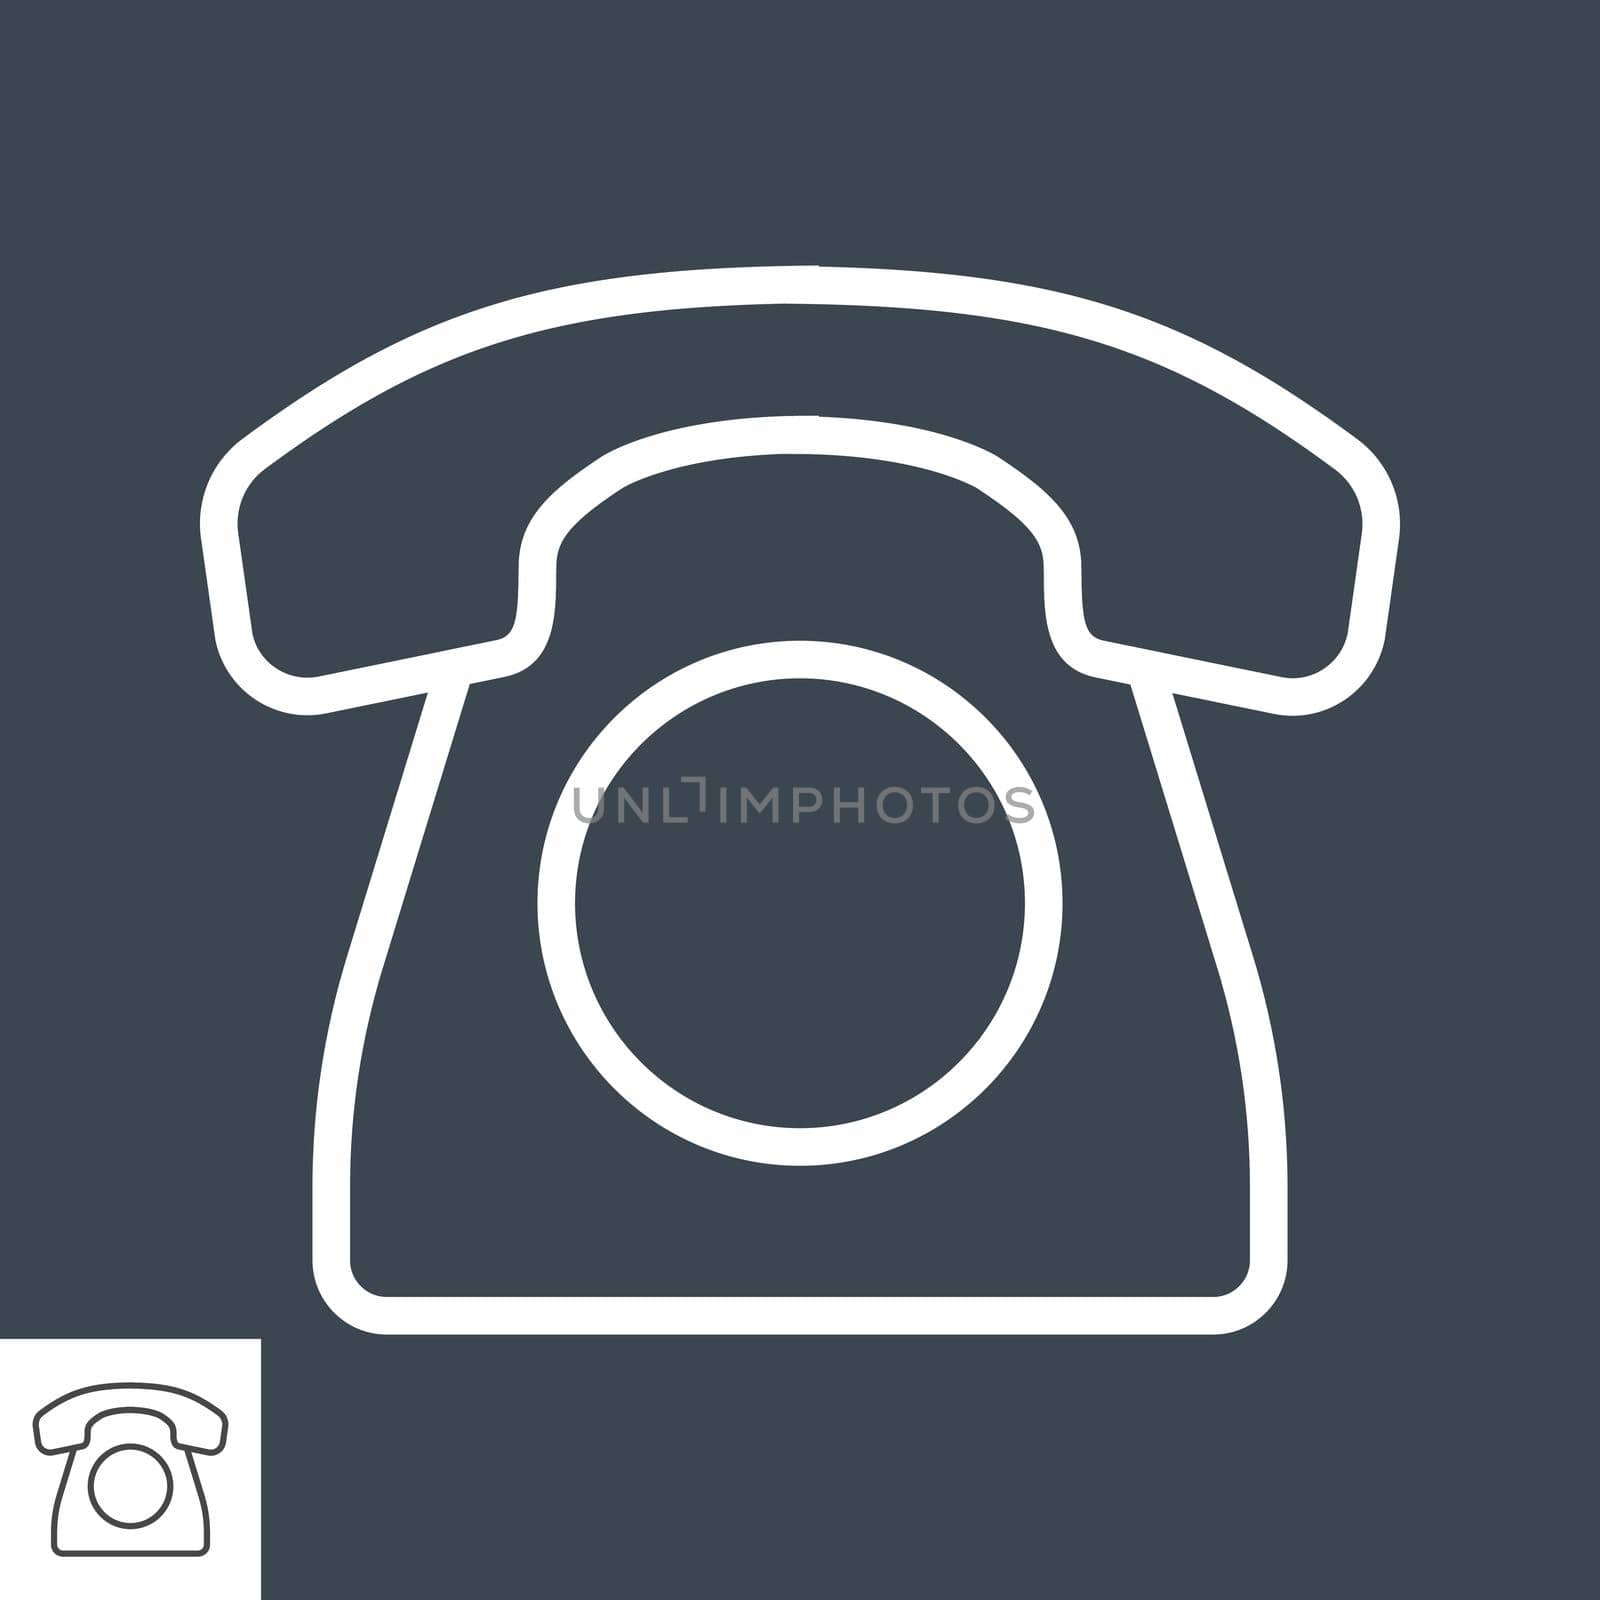 Phone Thin Line Vector Icon. Flat icon isolated on the black background. Editable EPS file. Vector illustration.